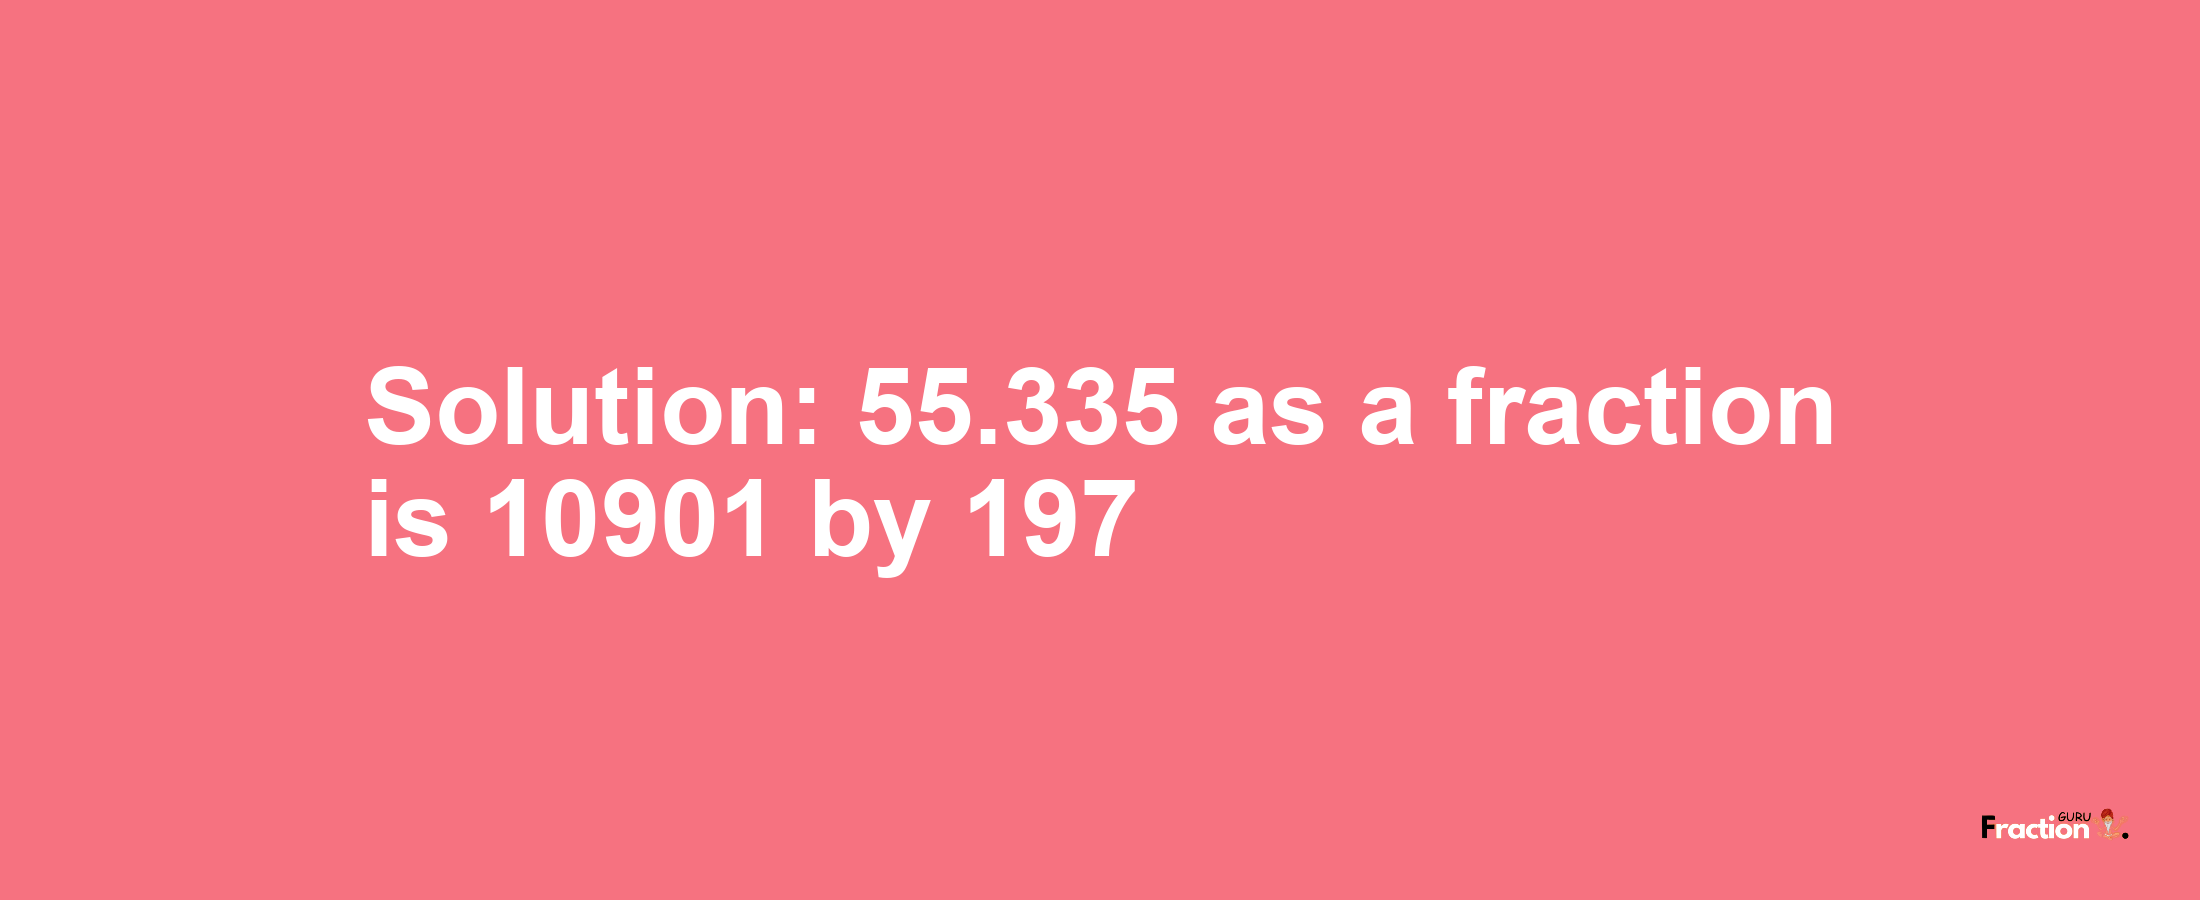 Solution:55.335 as a fraction is 10901/197